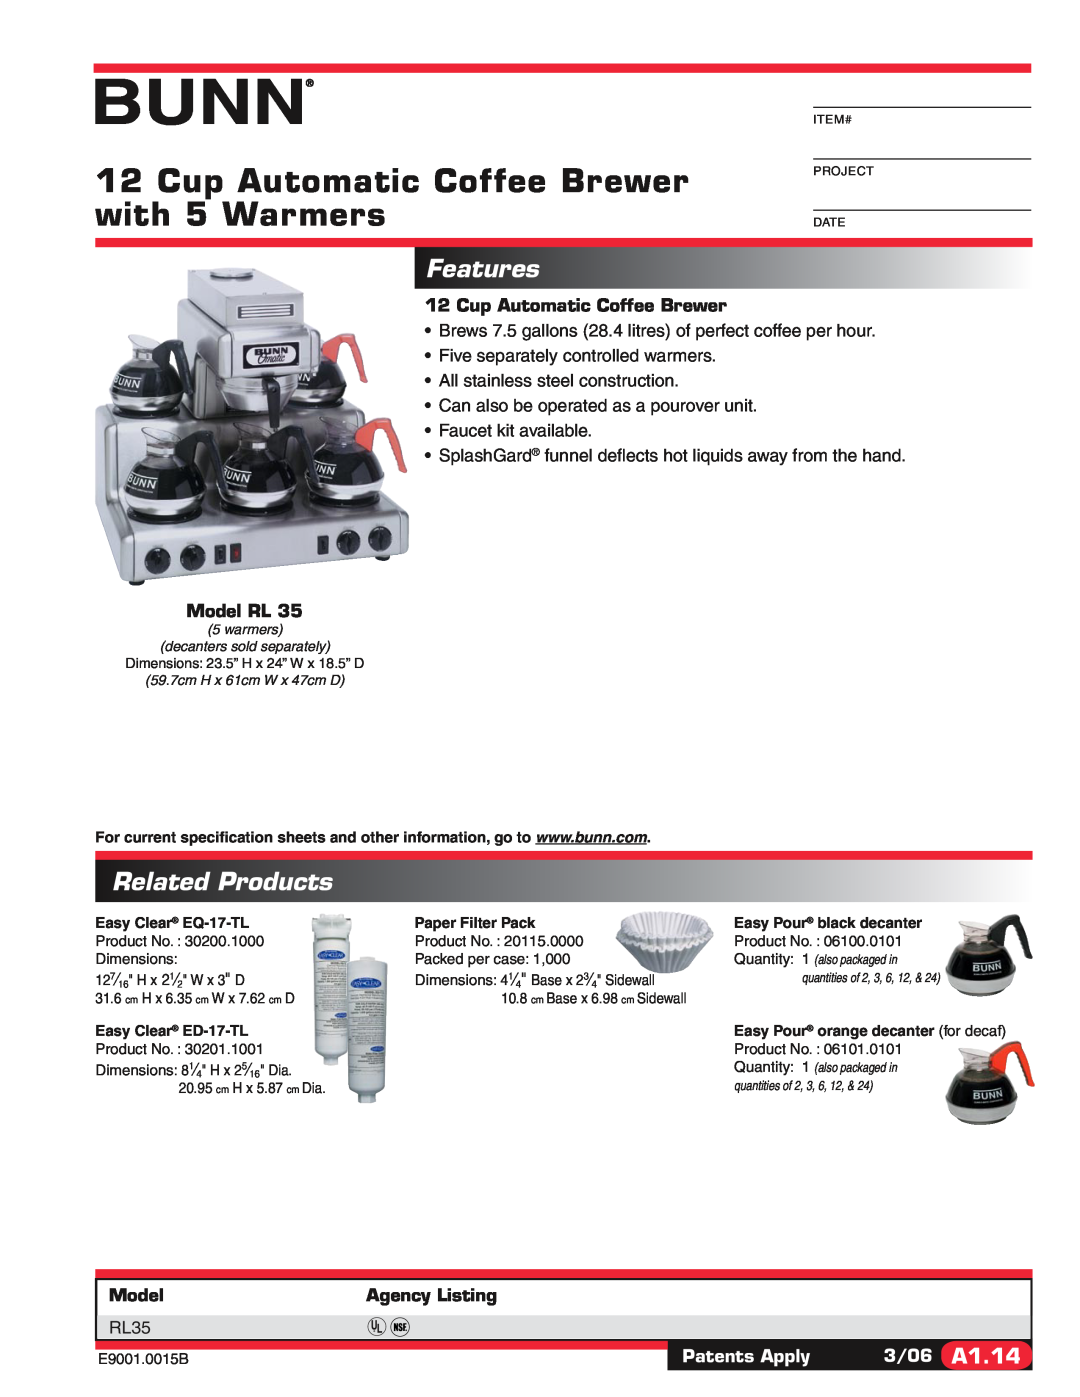 Bunn RL35 specifications Cup Automatic Coffee Brewer with 5 Warmers, Features, Related Products, Model RL, Agency Listing 